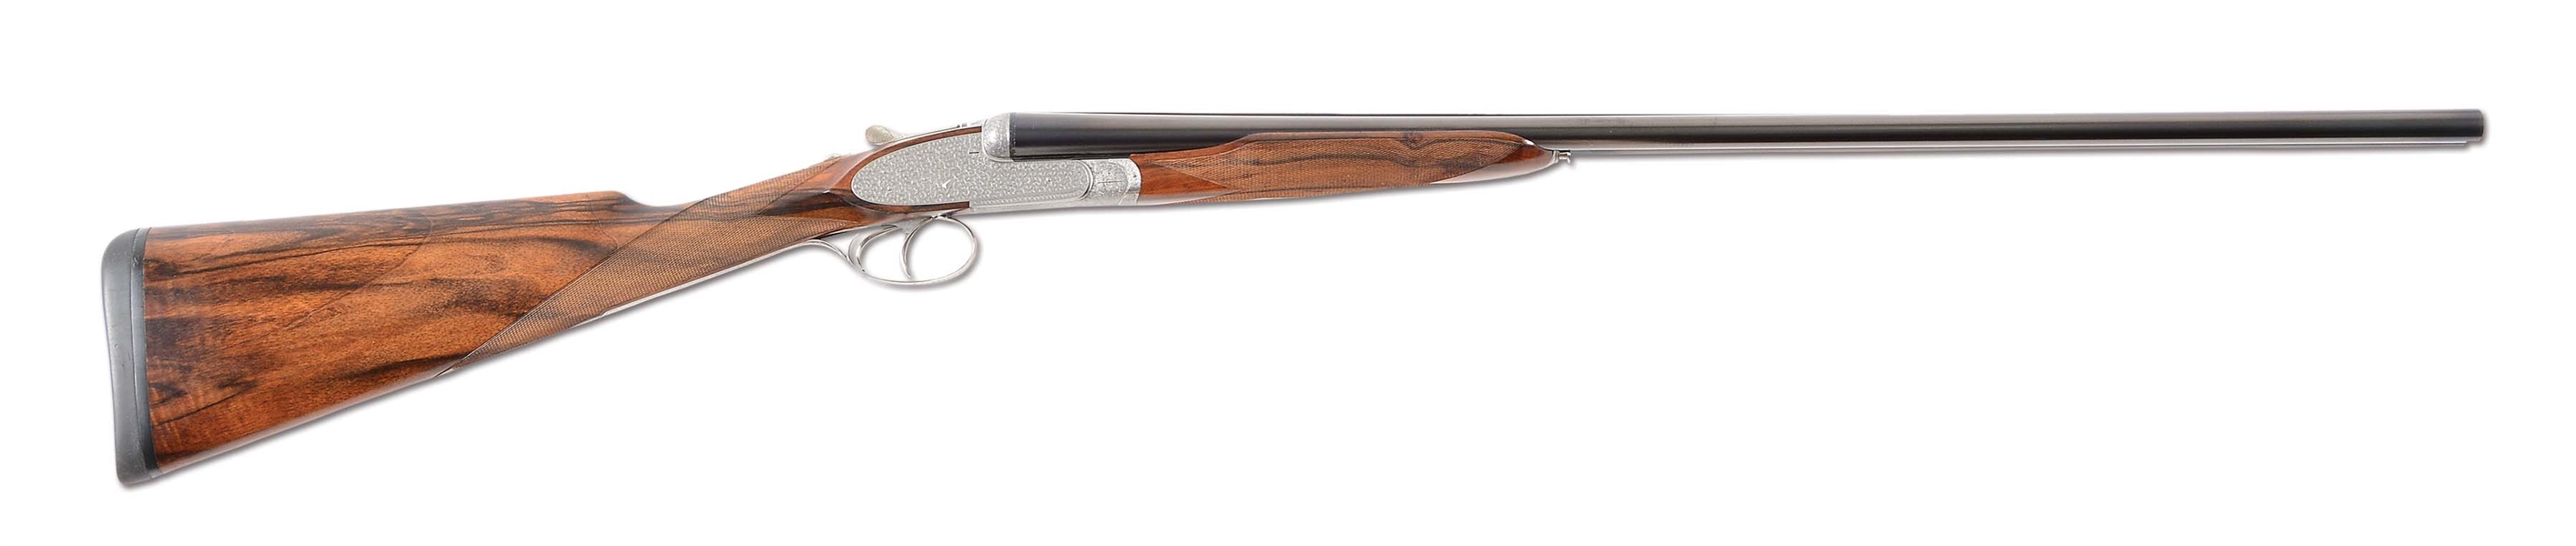 (M) SECOND GUN IN THE SERIES "SET FOR LIFE" 28 GAUGE PIOTTI KING 1 SHOTGUN WITH MINUSCULE SCROLL BY RANETTI.